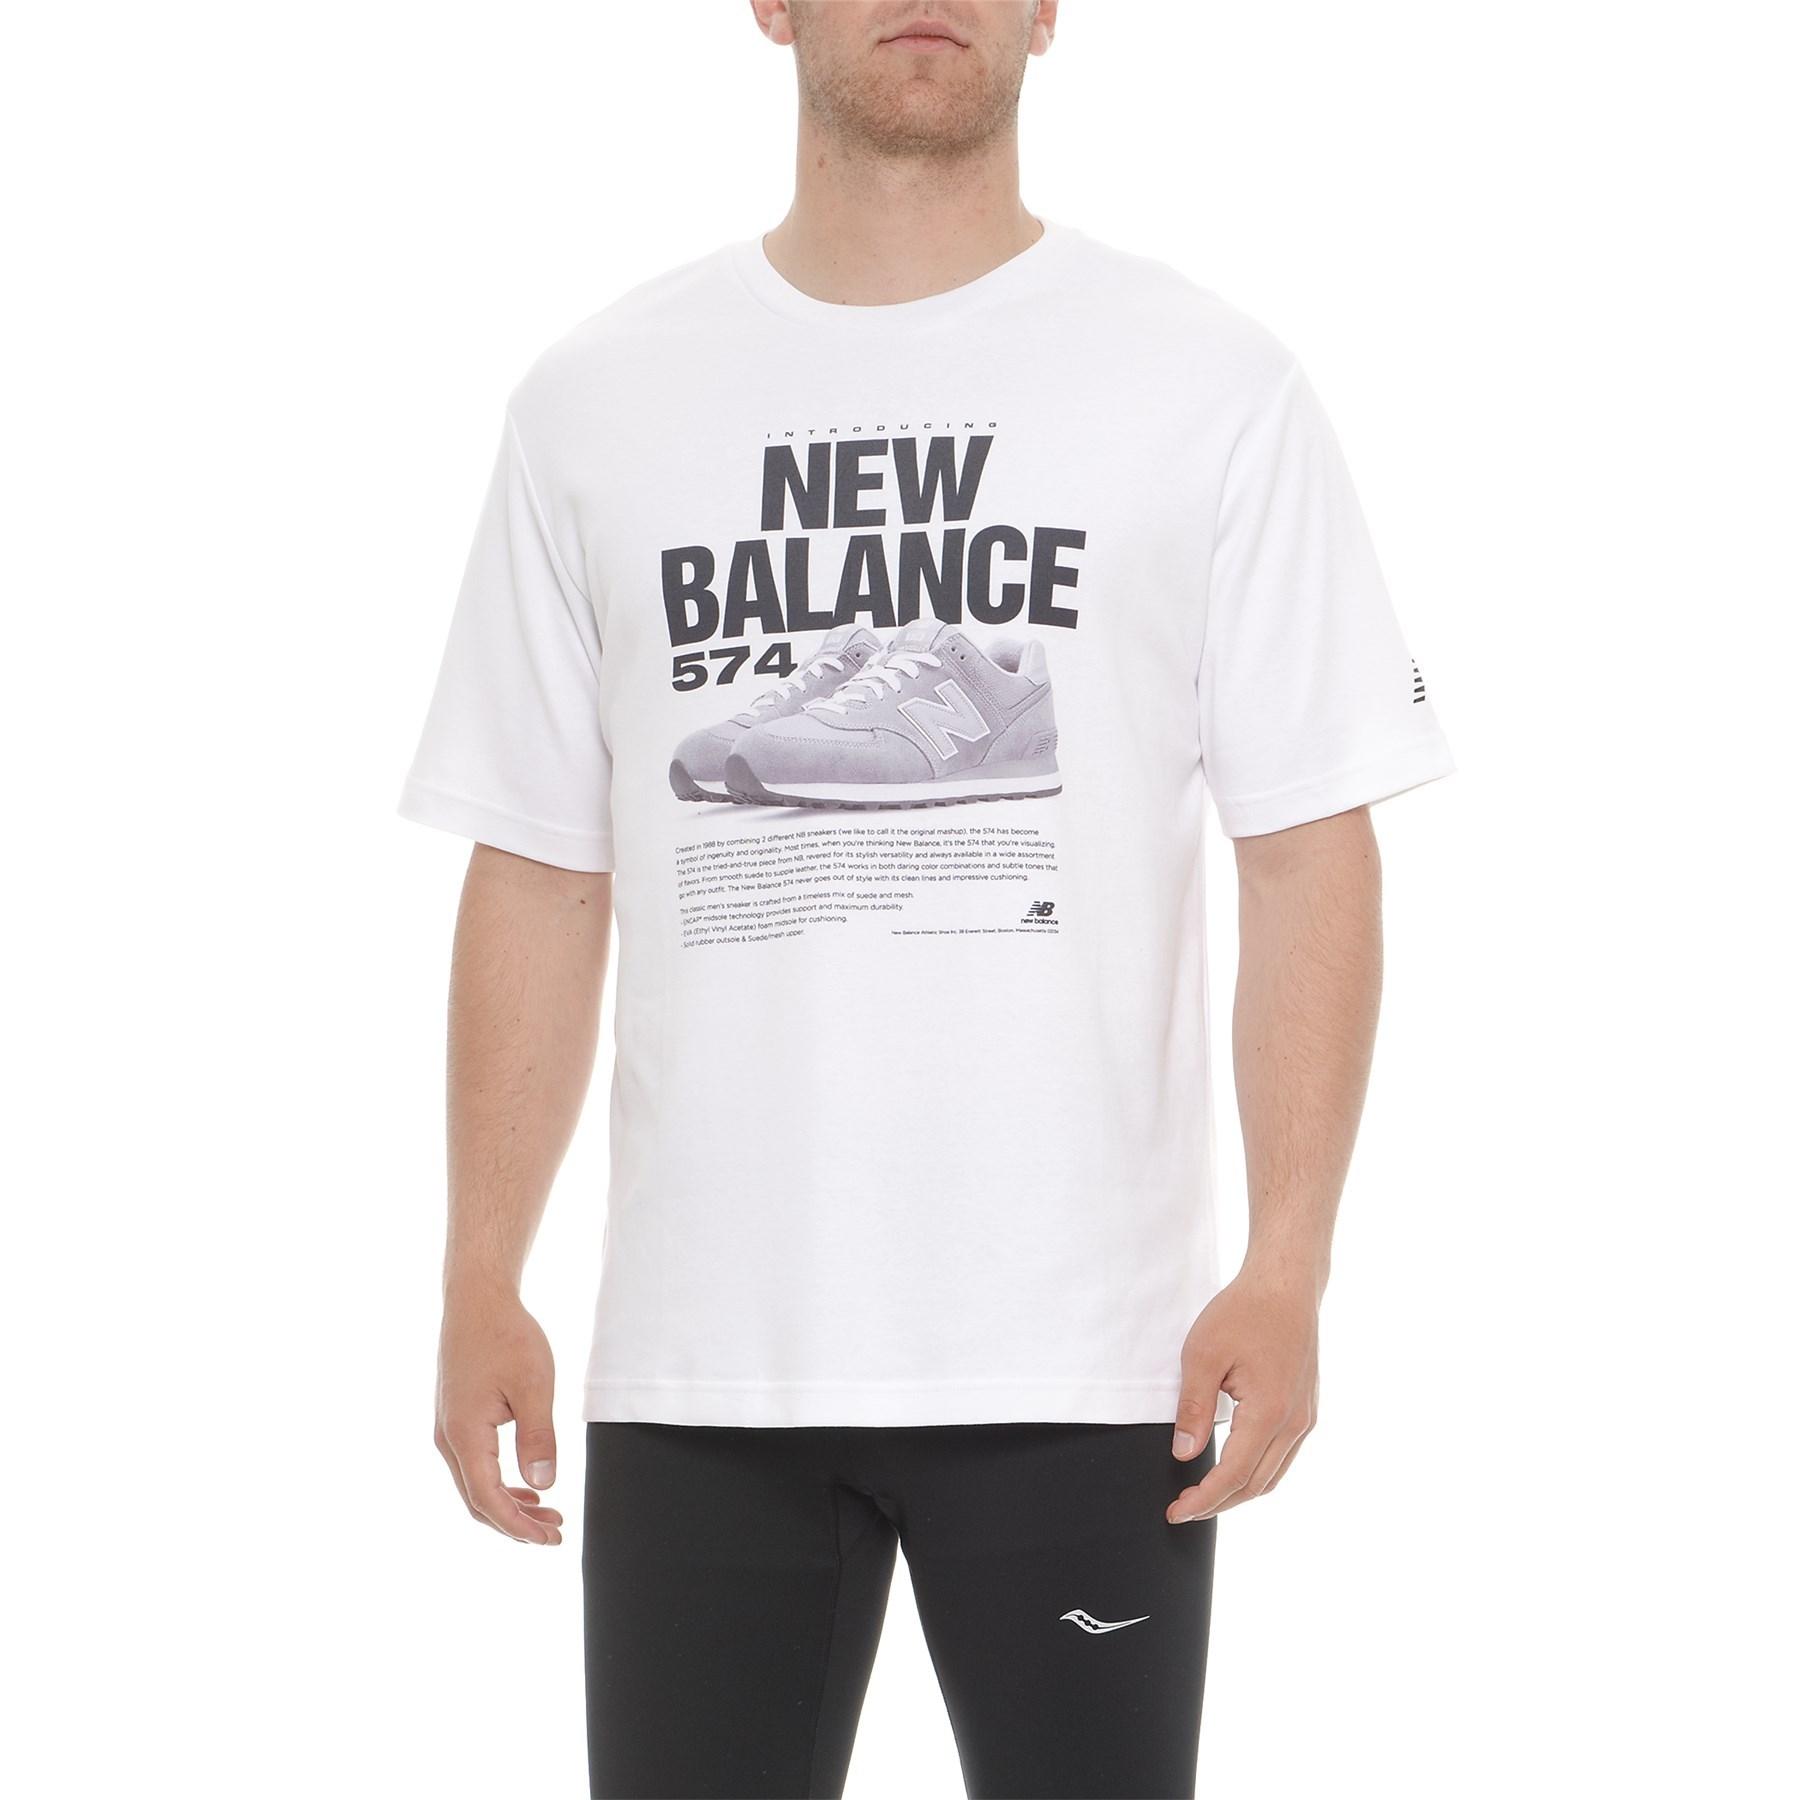 New Balance Cotton 574 T-shirt in White 